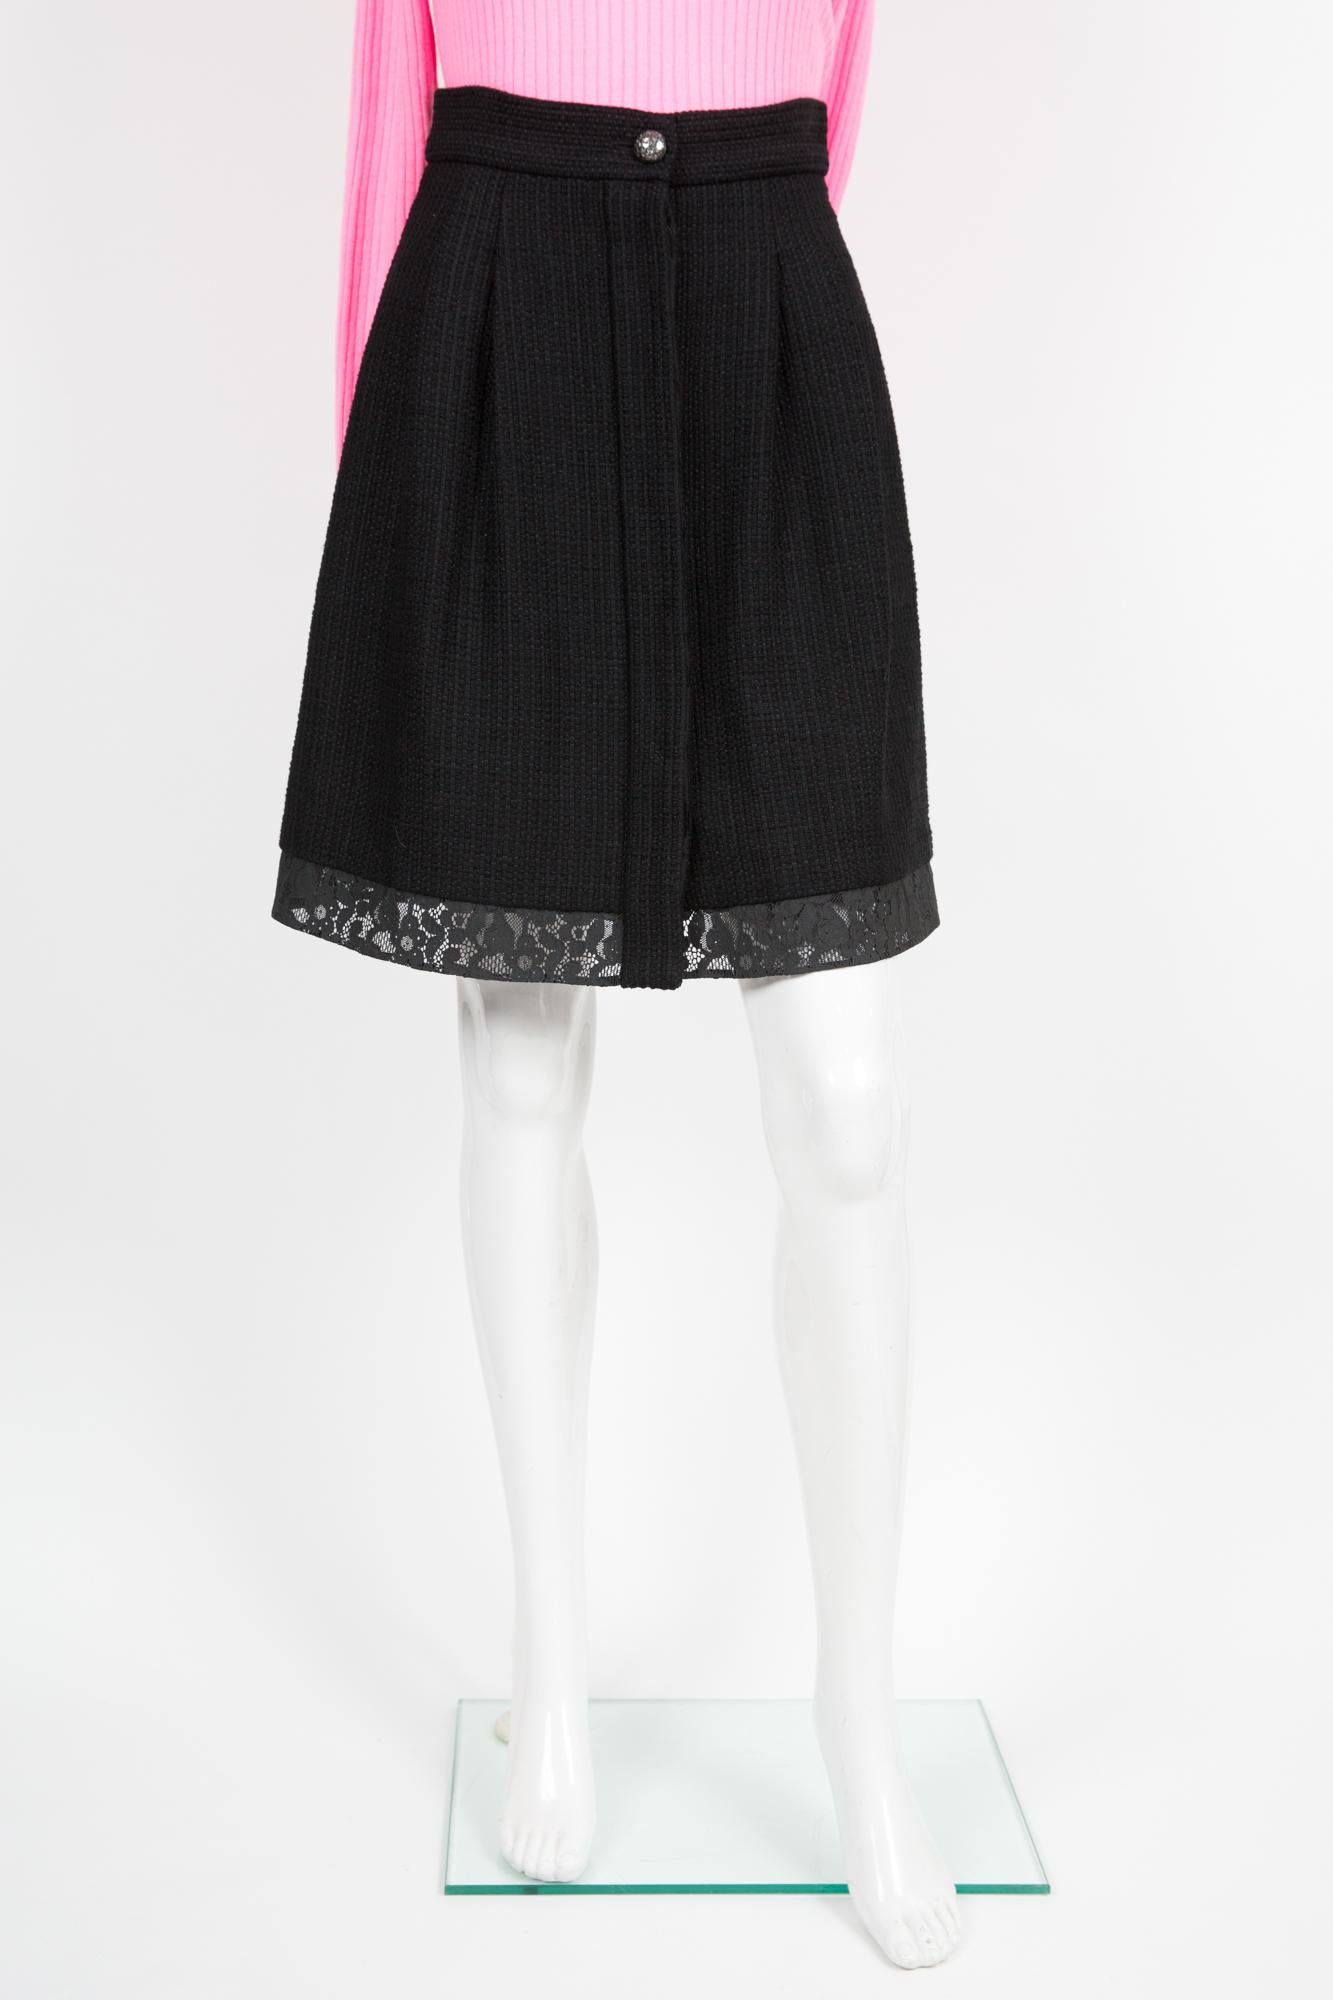 Chanel black fancy tweed pleated skirt featuring a textured  cotton tweed fabric, a bottom lace finishing, a front shiny fancy button and logo hidden buttons,  side pockets, full silk lining. Circa: 2000s
91% Cotton
9%nylon
Lining: 100% silk
In good